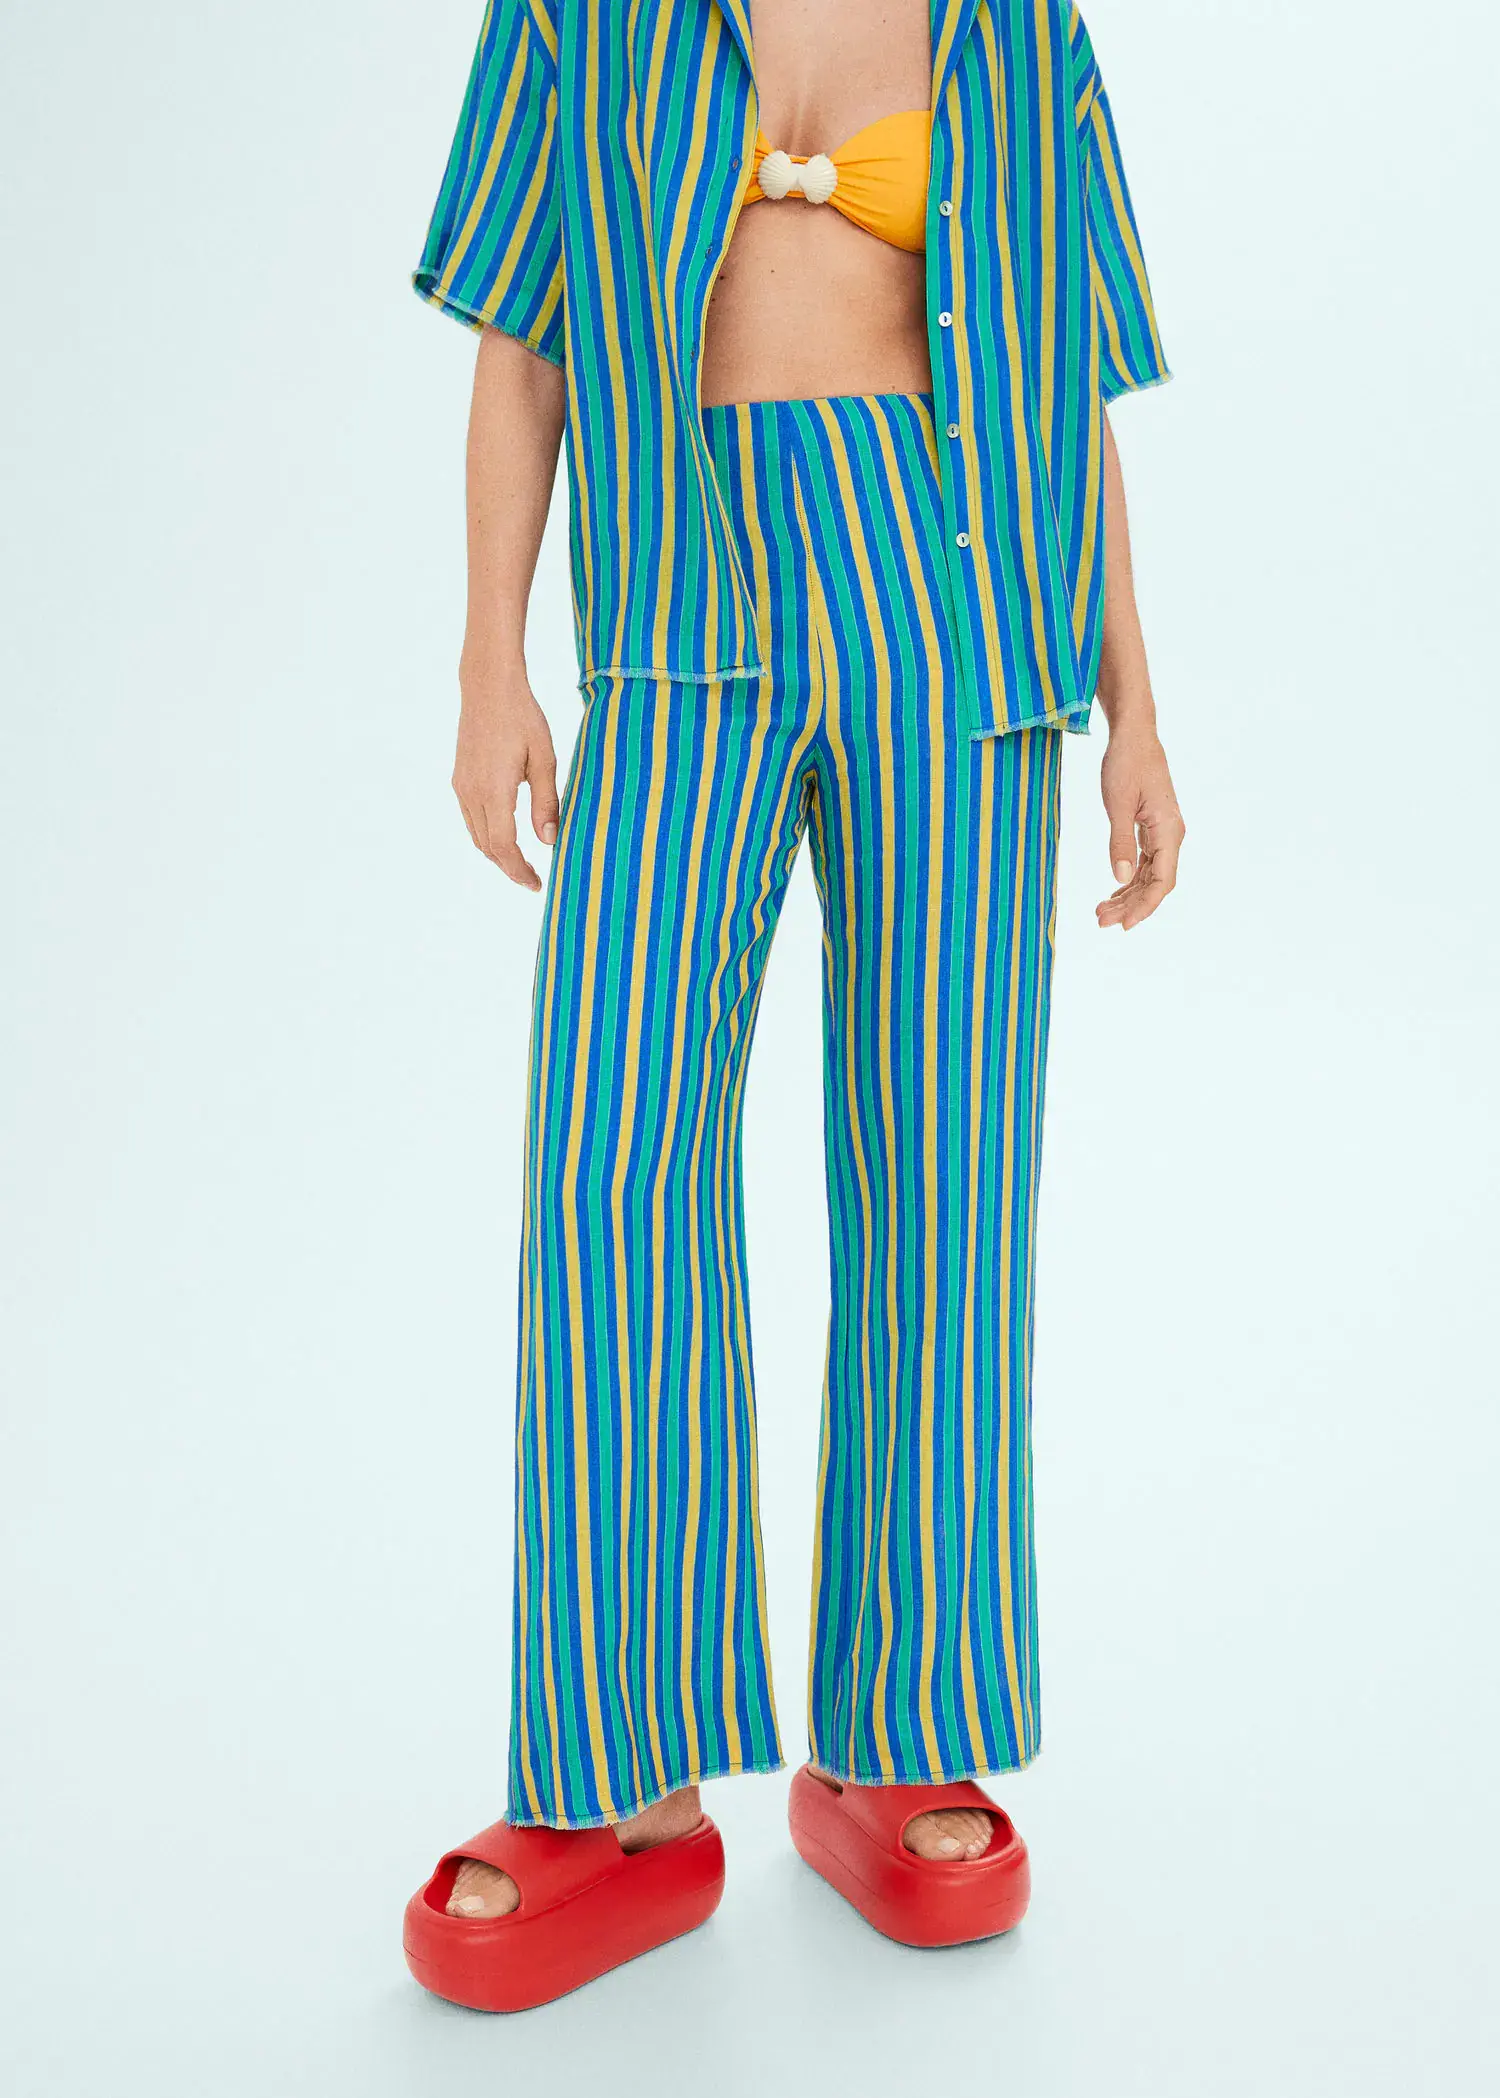 Mango Multi-coloured striped linen trousers. a person standing in a room wearing a blue and yellow striped outfit. 